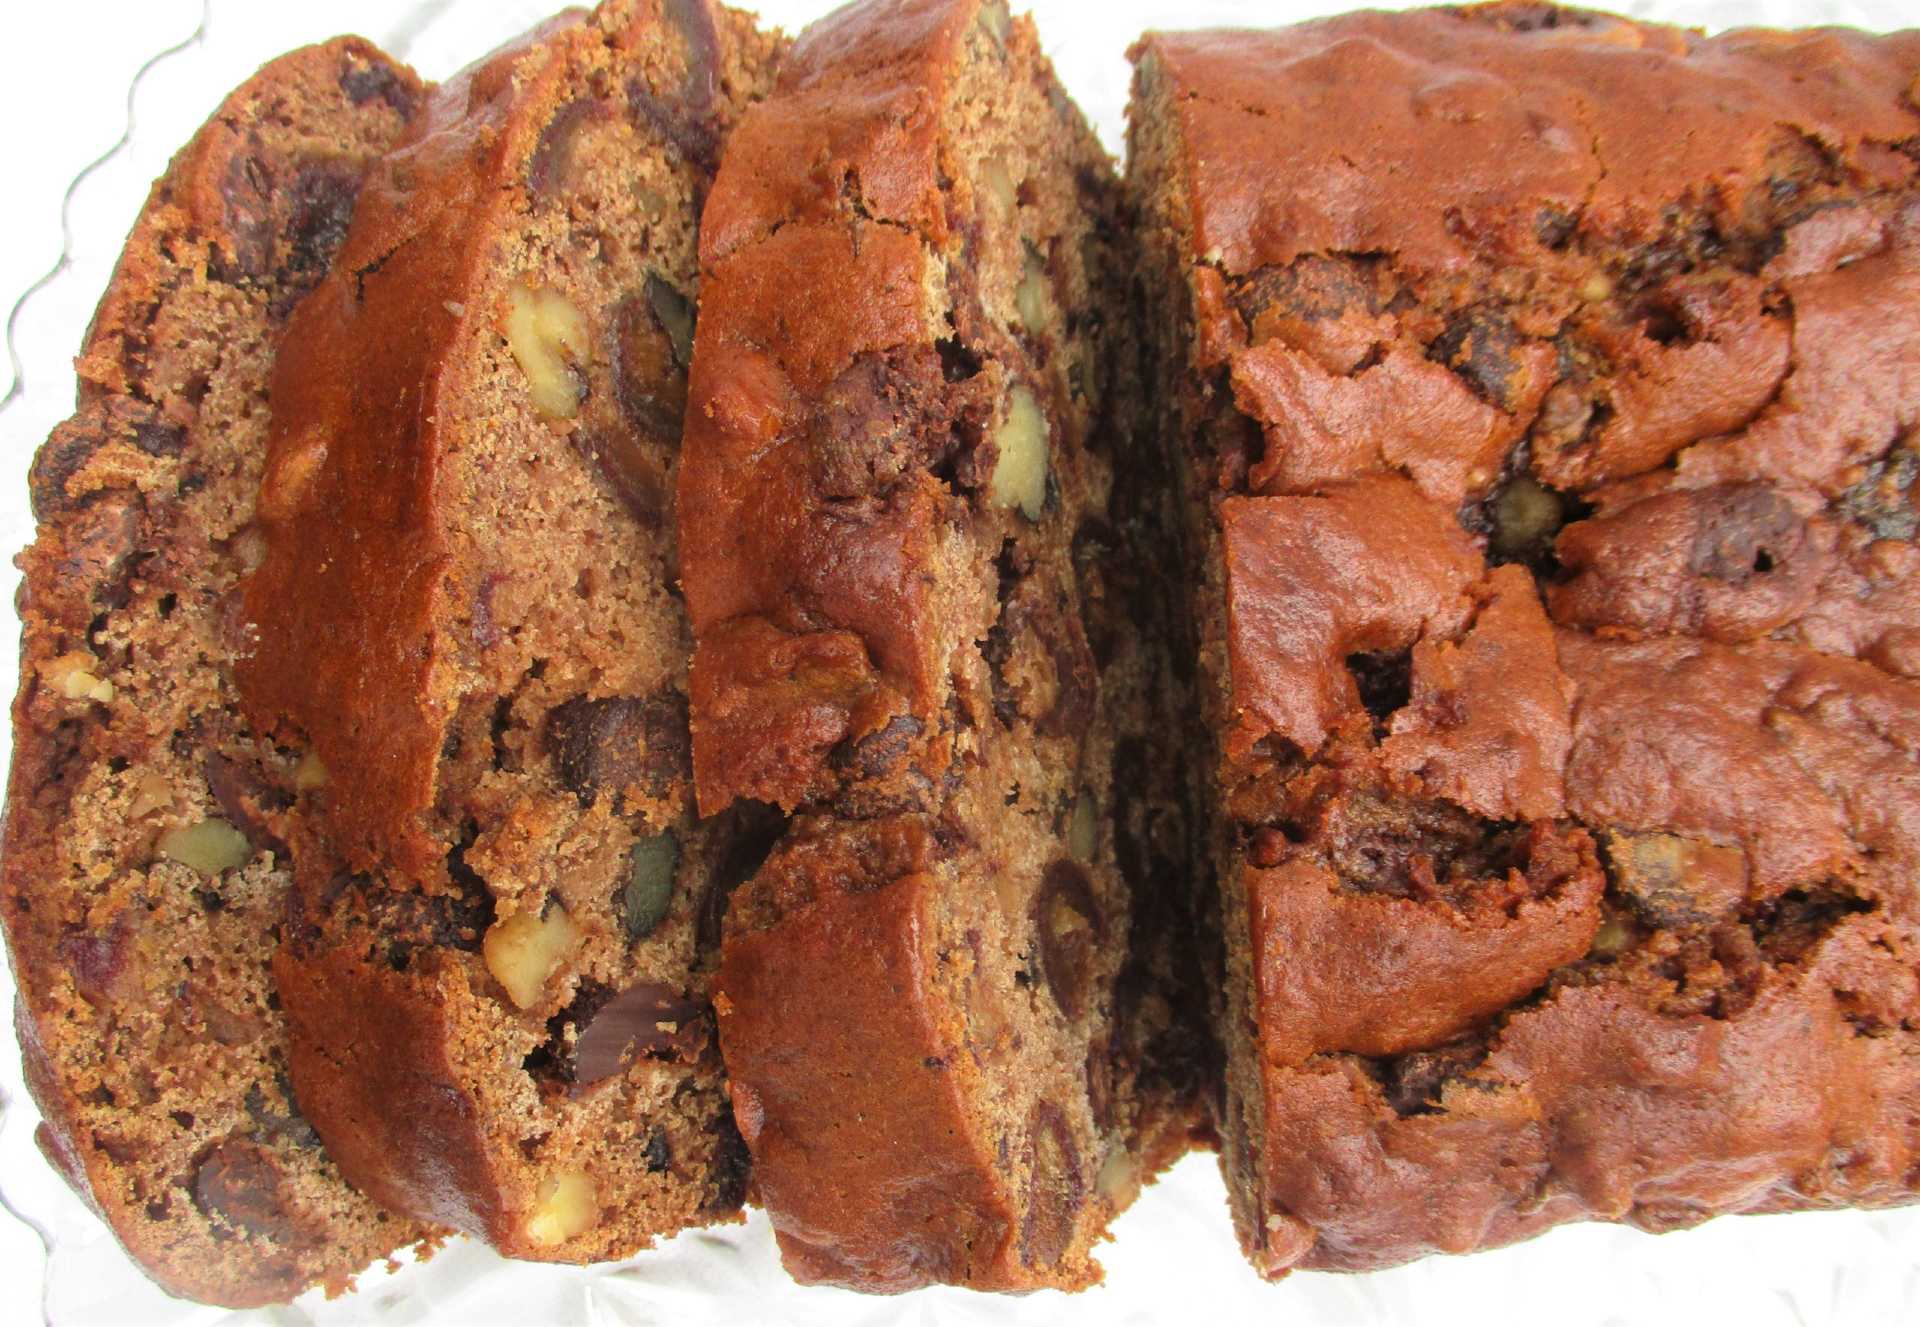 Chocolate Chip Date Nut Bread